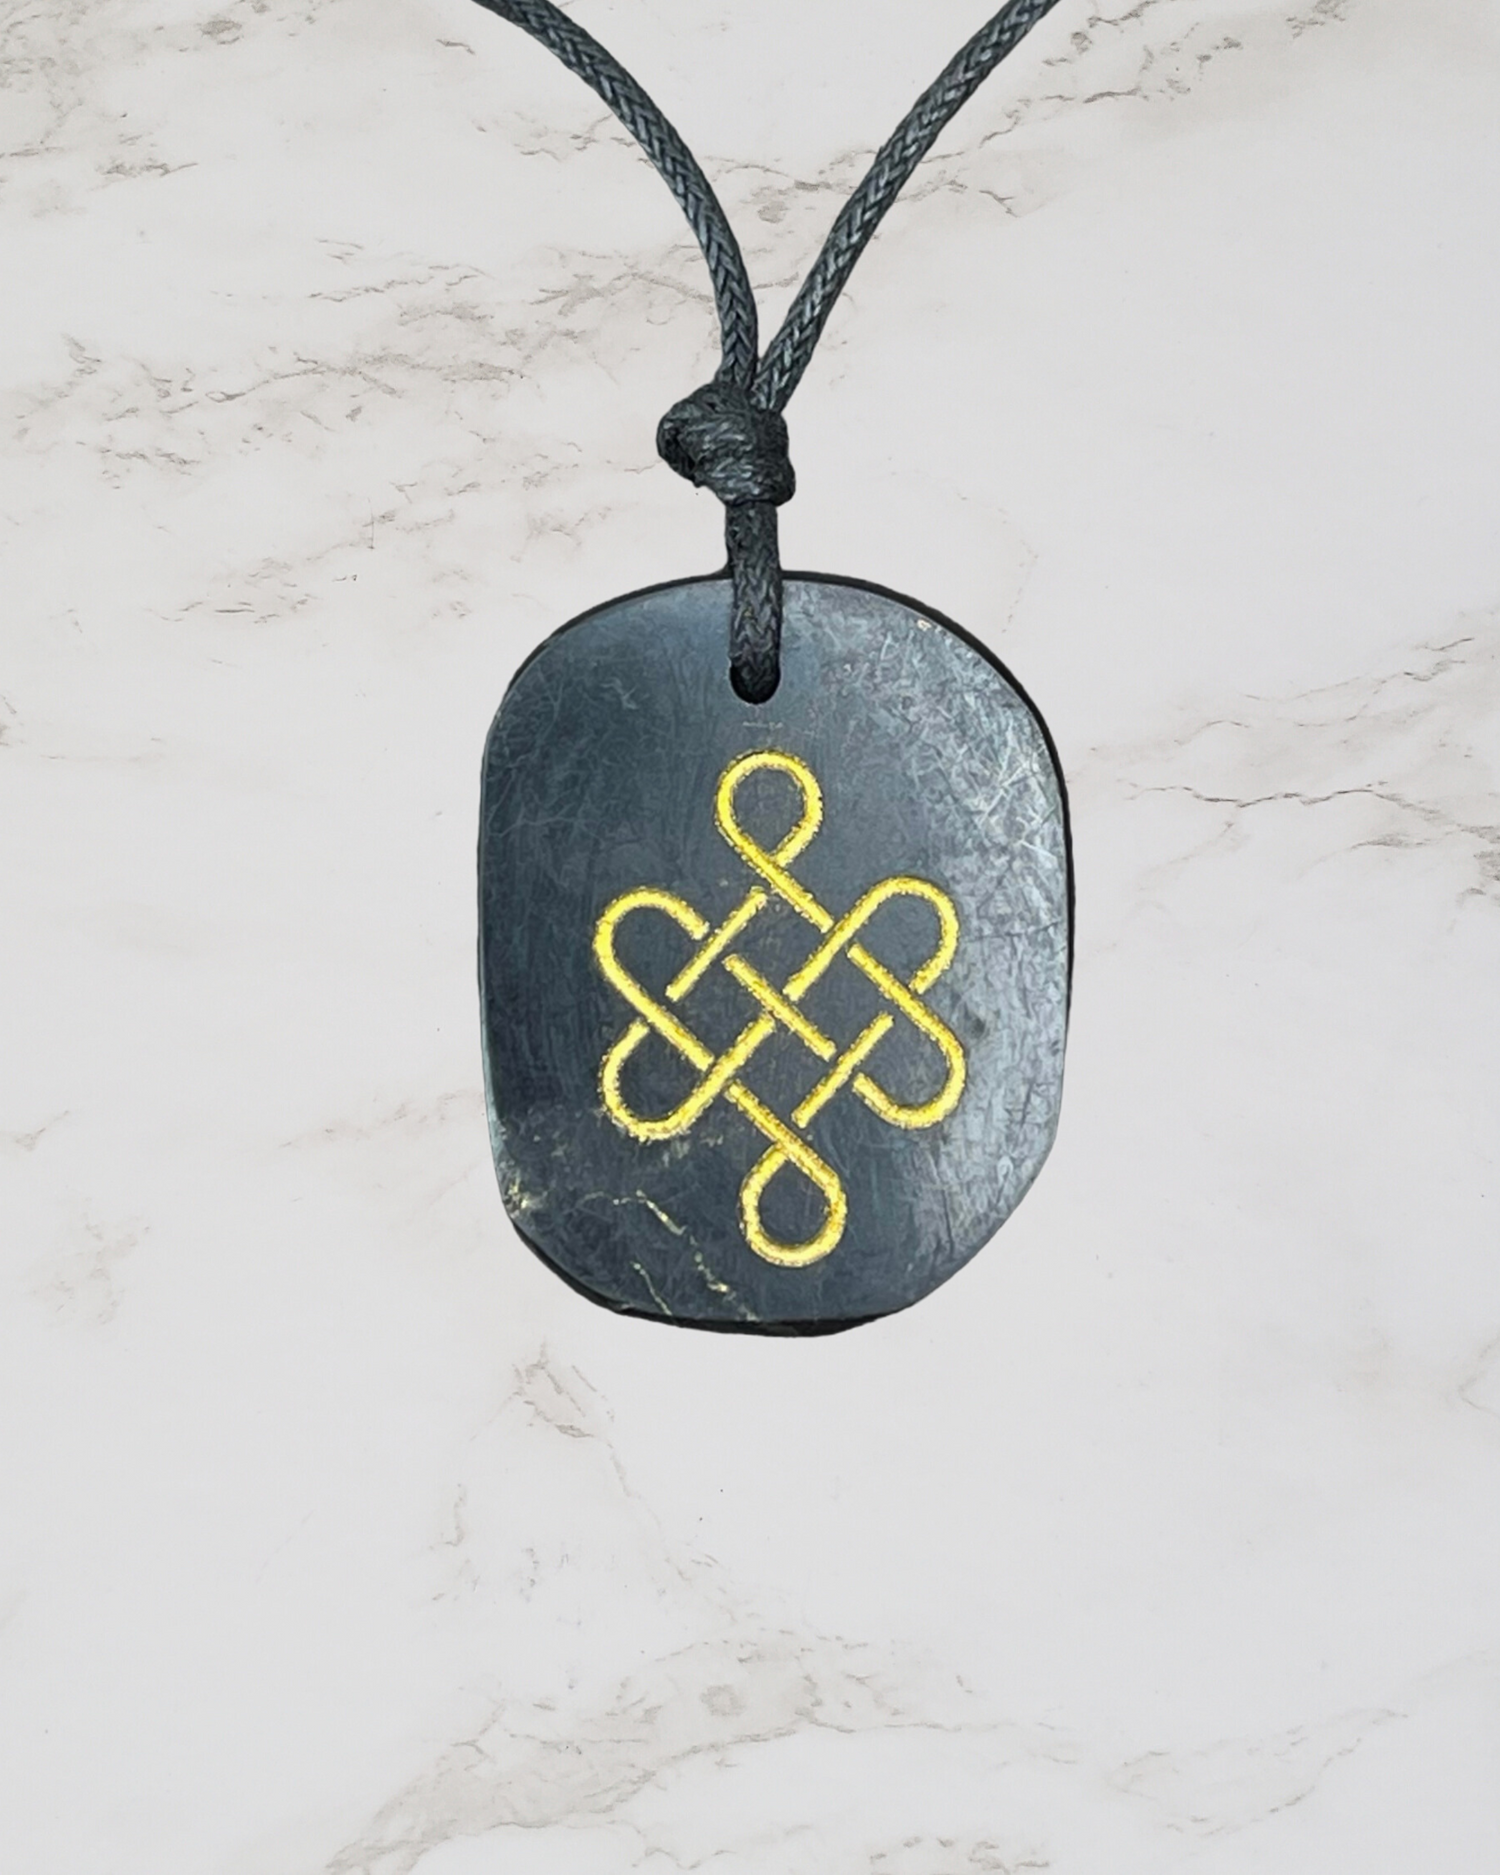 Frequency Jewelry Natural Pain Relief and Protection from 5G and EMFs Shungite Necklace with Engraved Celtic Knot